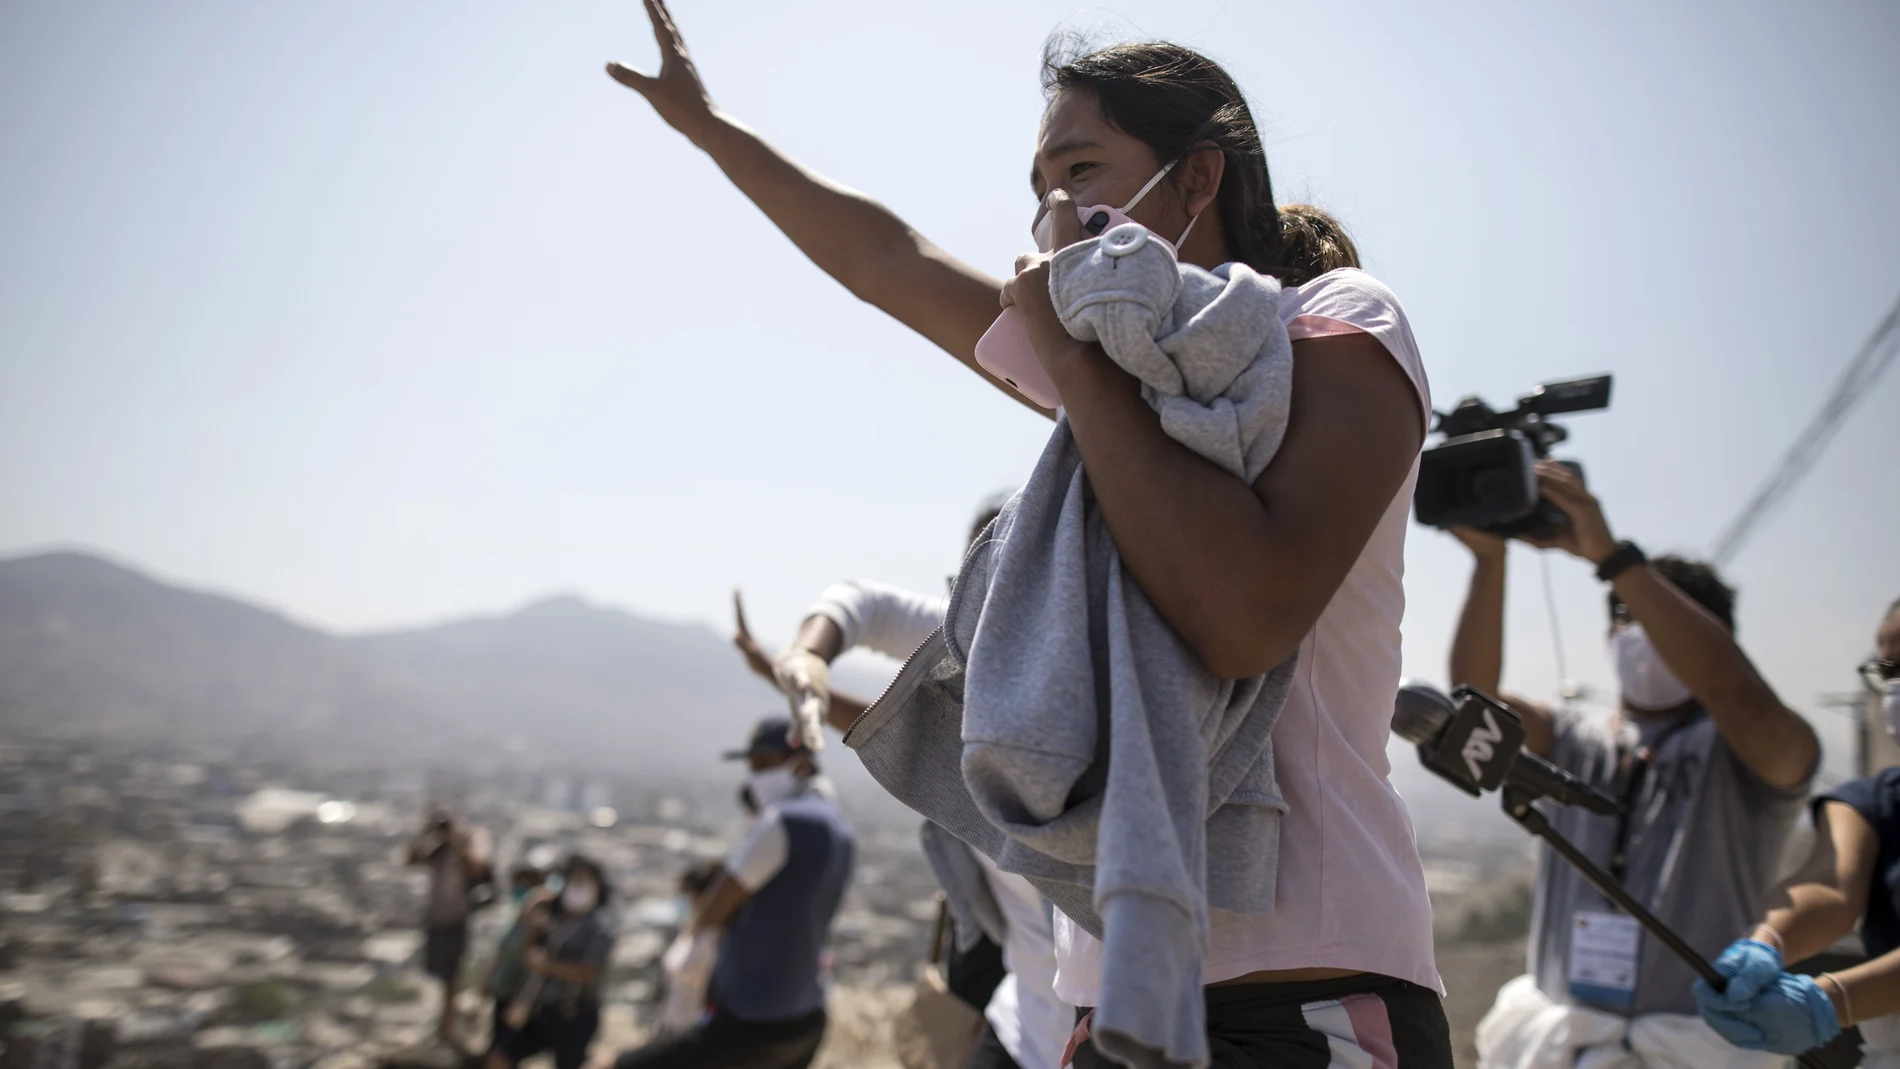 From the top of a hill, a woman shouts at a relative who is an inmate at the Lurigancho prison during a prison protest, in Lima, Peru, Tuesday, April 28, 2020. Inmates complain that authorities are not doing enough to prevent the spread of the new coronavirus inside the prison. (AP Photo/Rodrigo Abd)